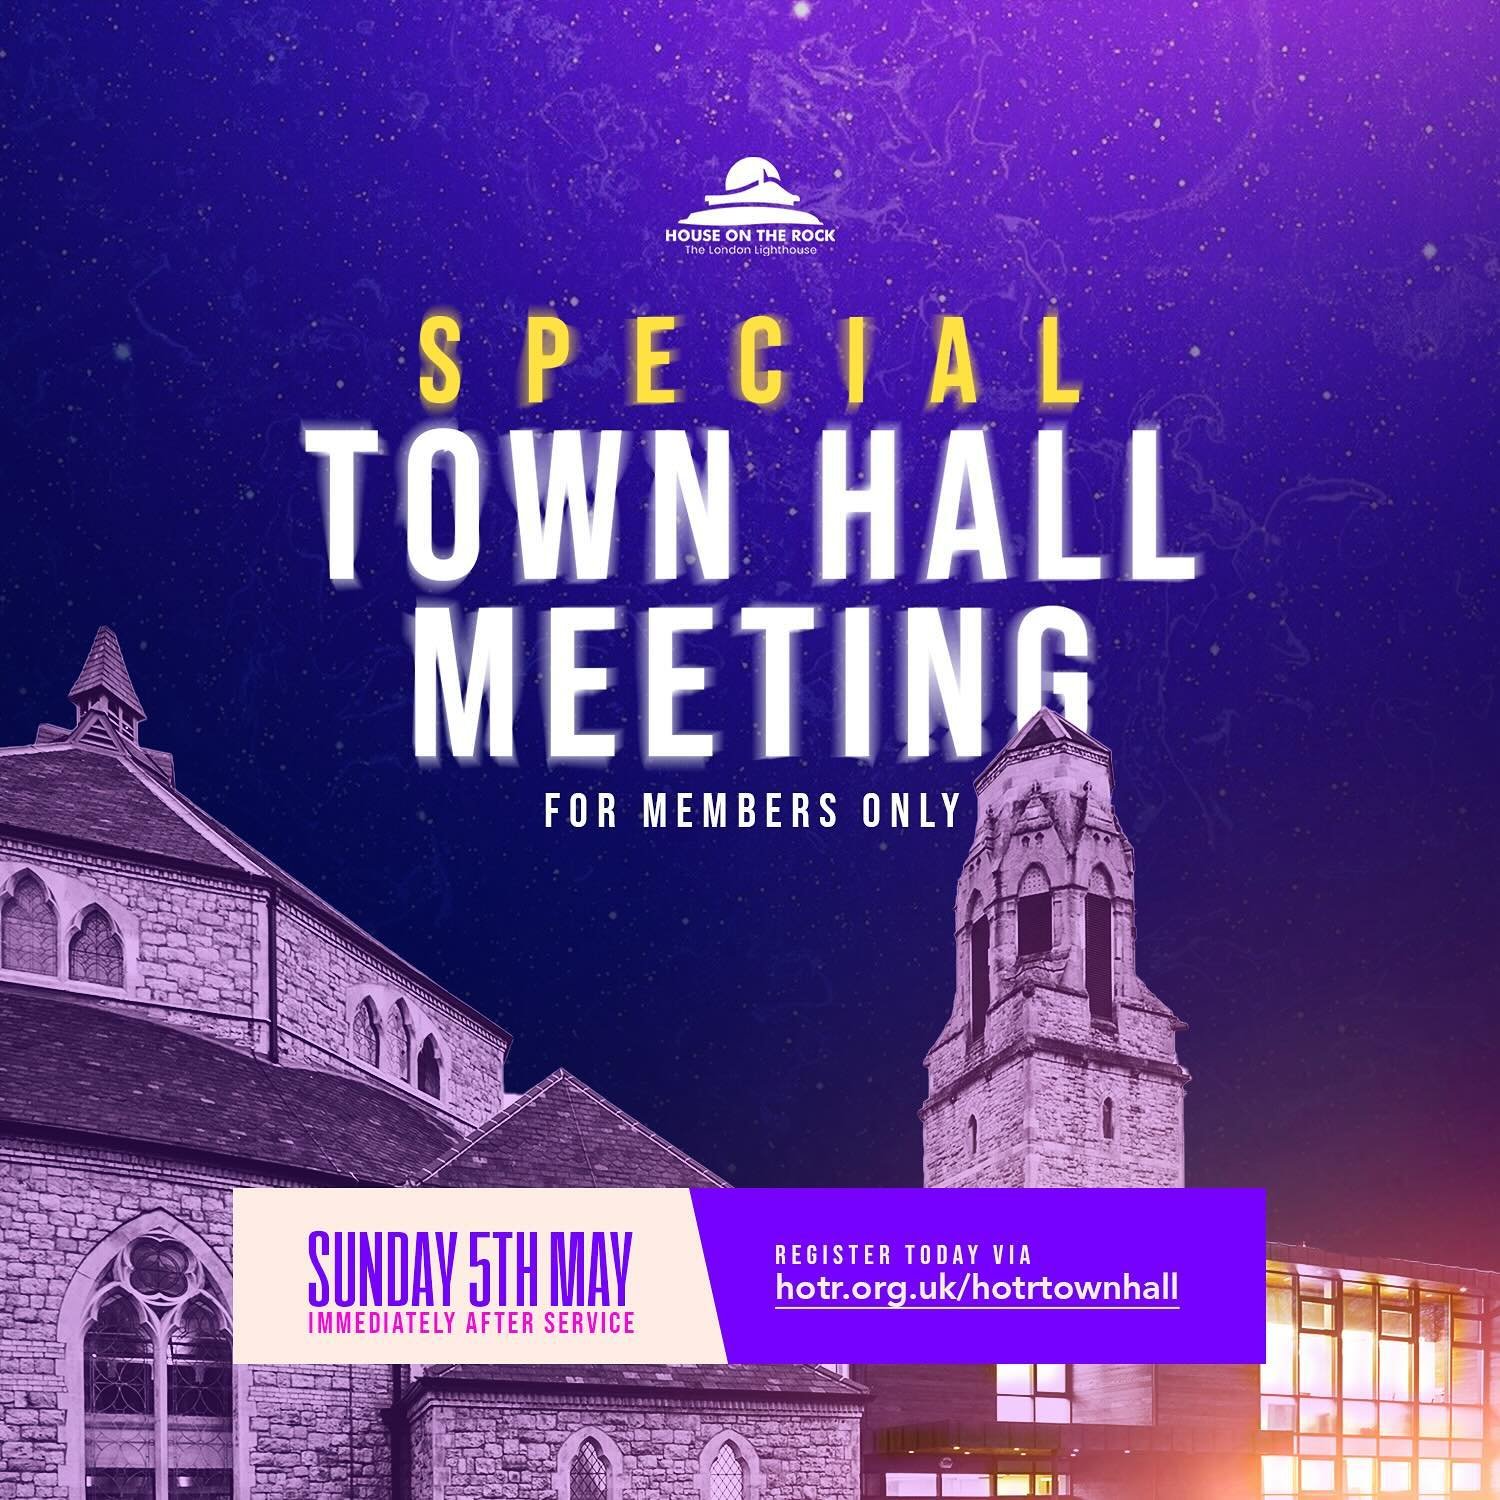 Hey there, valued member of the House!

Just a friendly reminder to mark your calendar for the HOTR Town hall on Sunday, the 5th of May 2024, right after the service at The Rock Tower.

It&rsquo;s not just a meeting&mdash;it&rsquo;s a chance to dive 